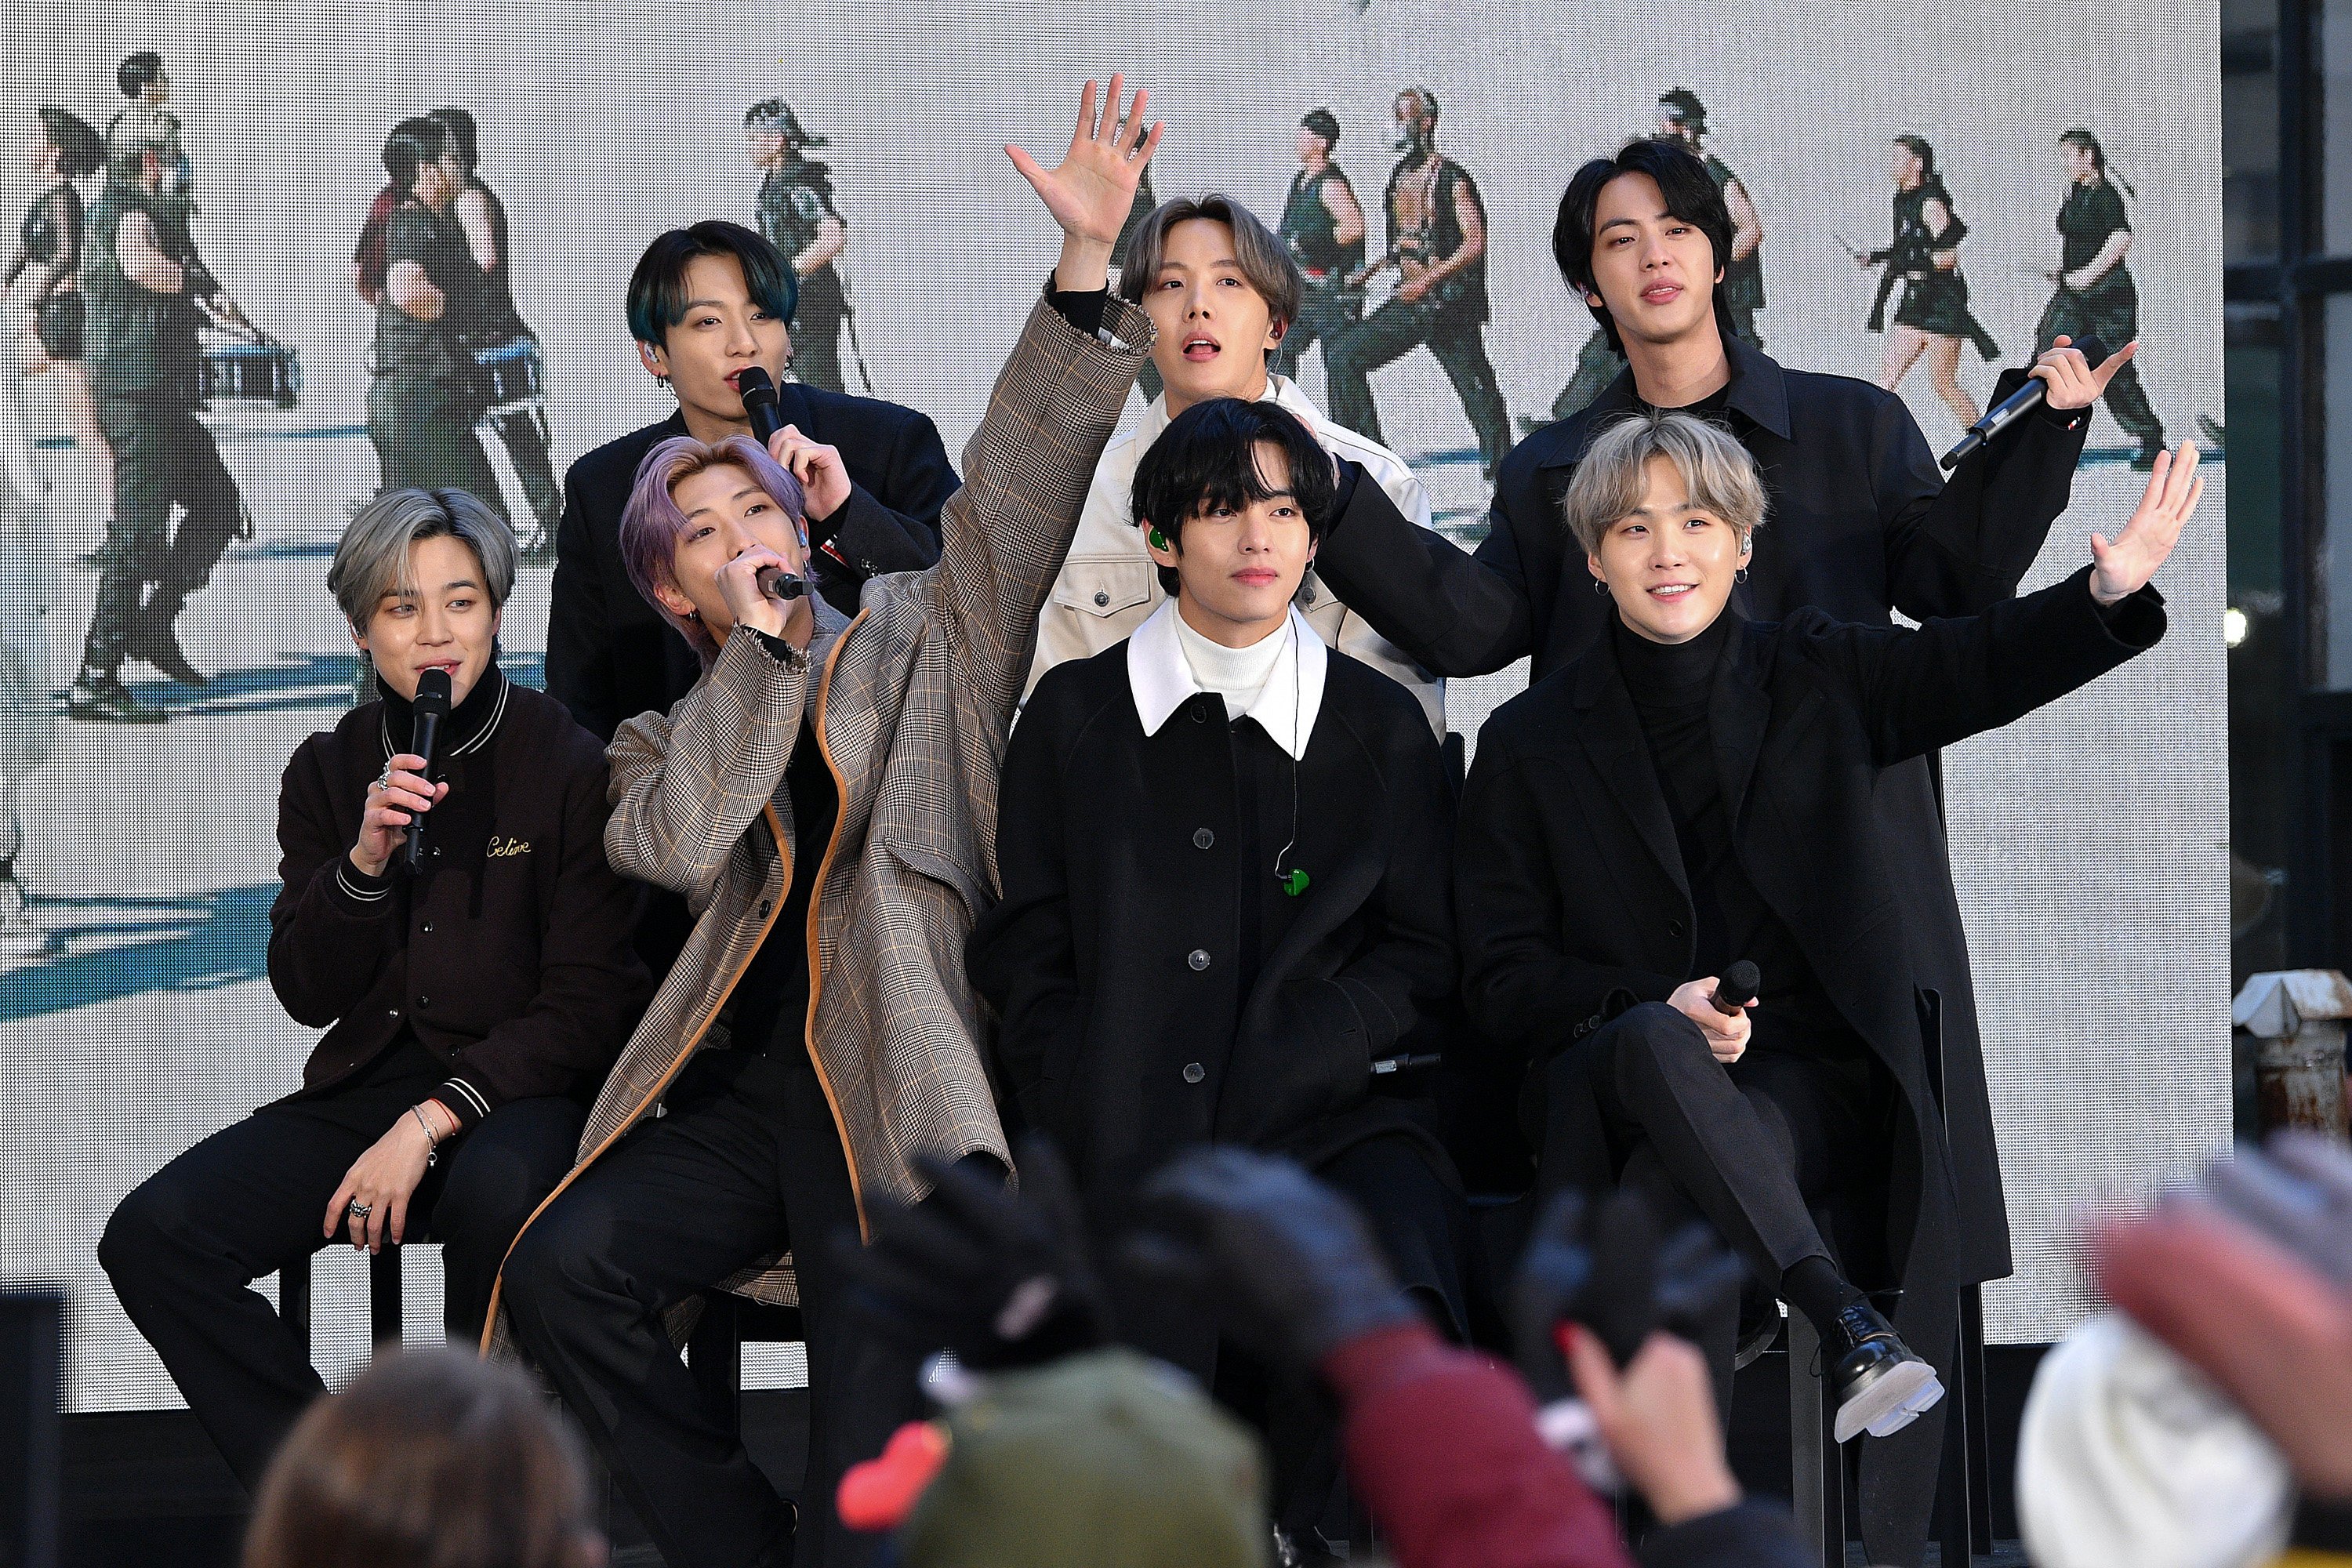 BTS just made history at the UN: Here are 5 things you need to